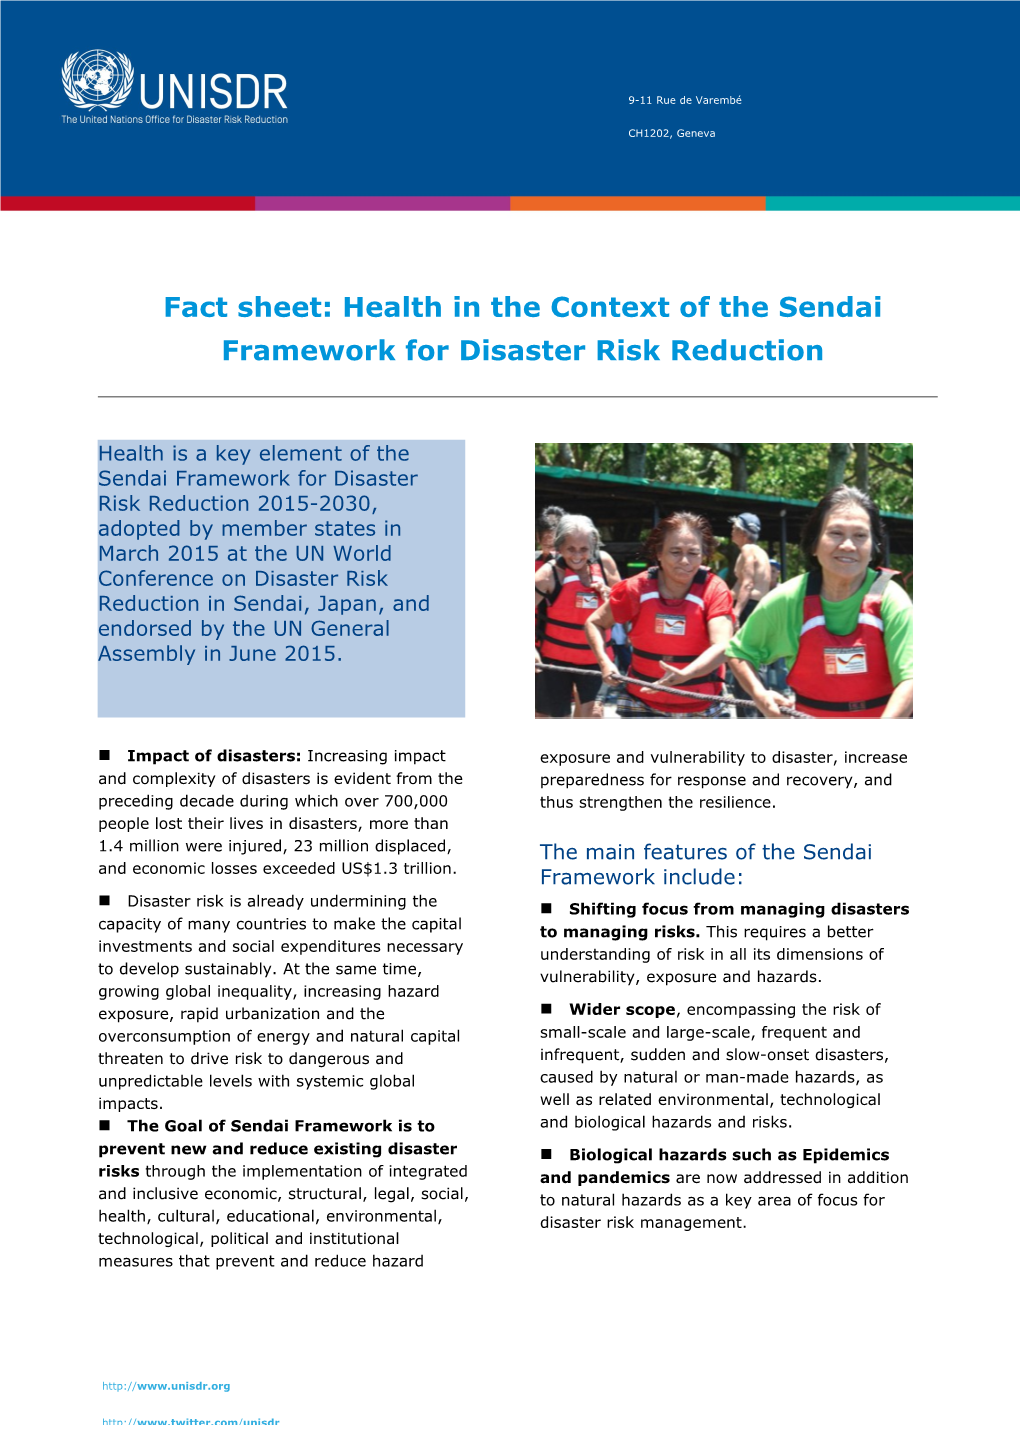 Fact Sheet: Health in the Context of the Sendai Framework for Disaster Risk Reduction